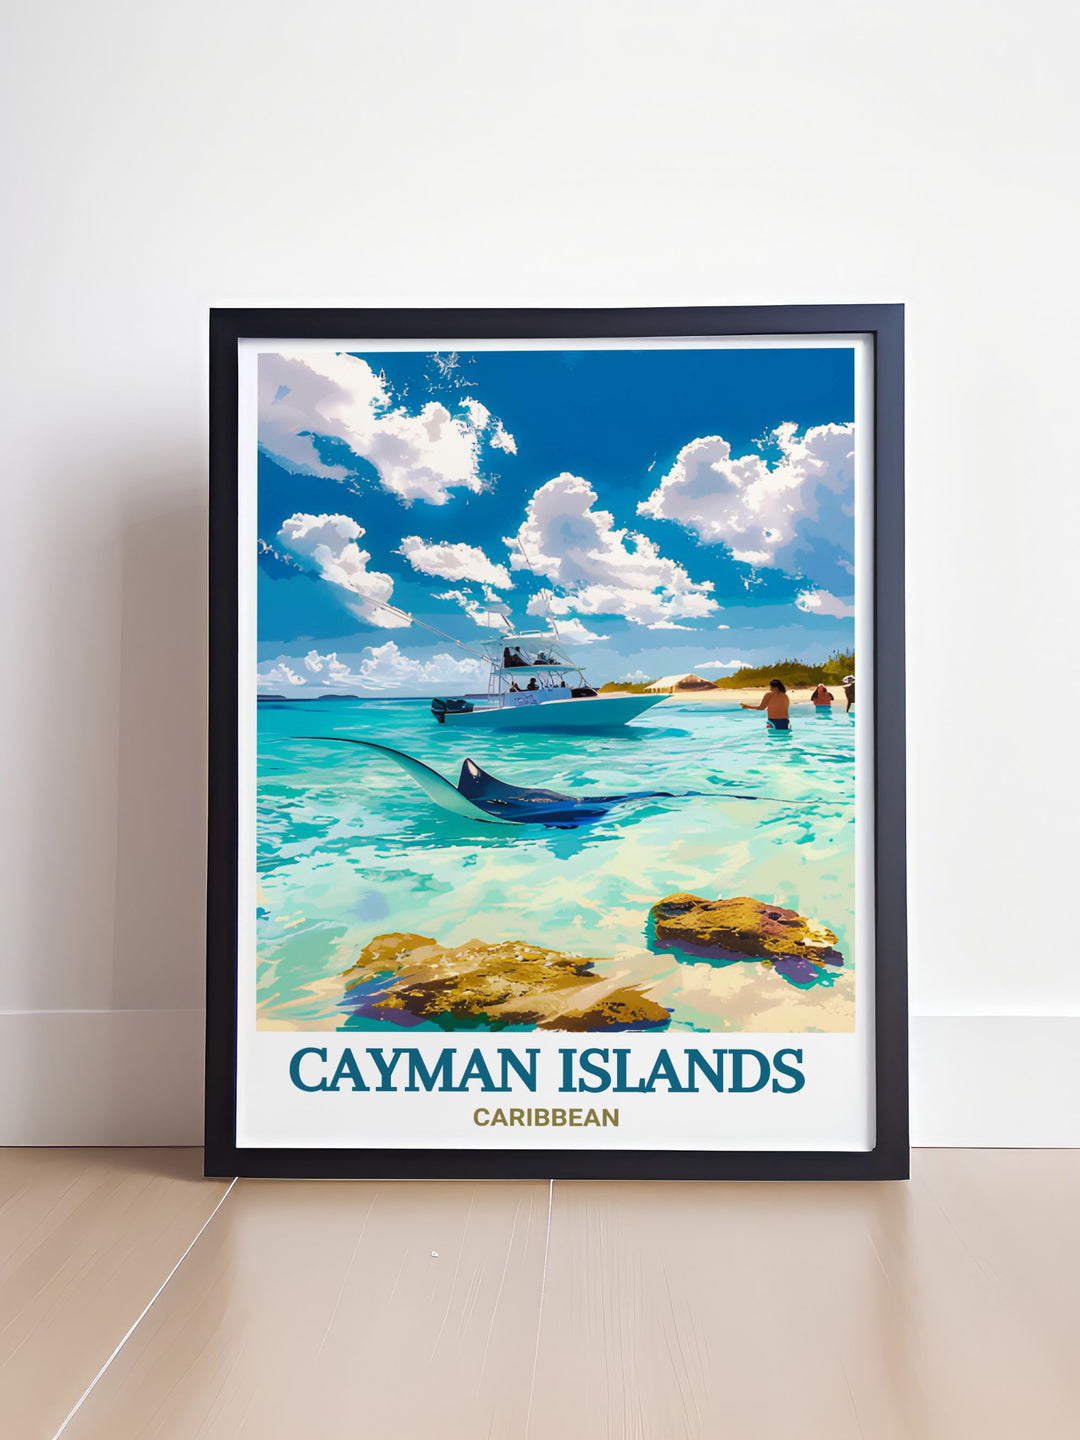 Cayman Islands art print of Stingray City highlighting the vibrant marine life and tranquil waters of the Caribbean available as a digital download and personalized gift ideal for travel enthusiasts and elegant wall decor lovers